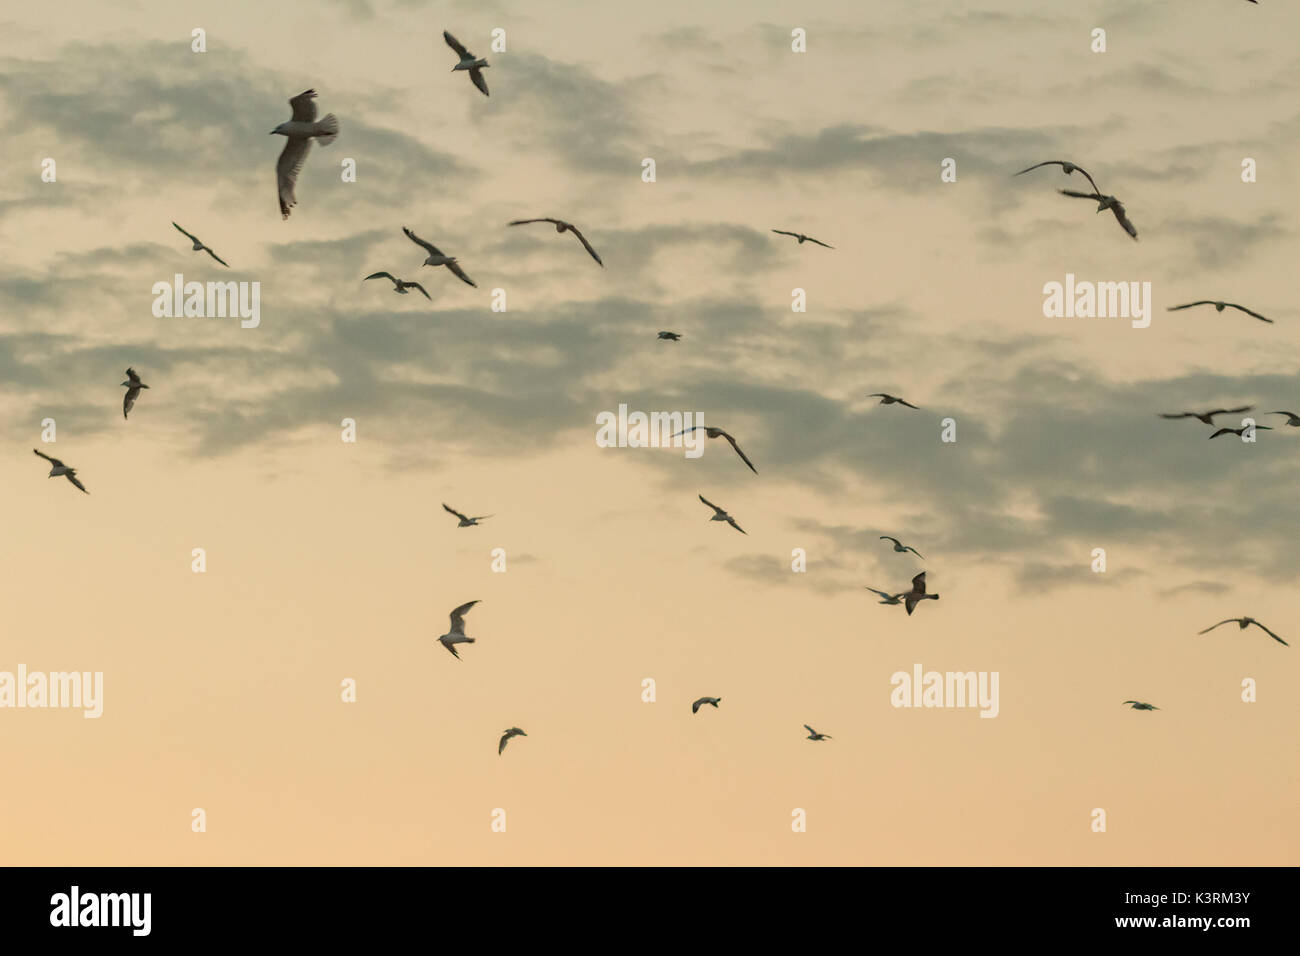 a group of seagulls flying through the air at sunset. Stock Photo